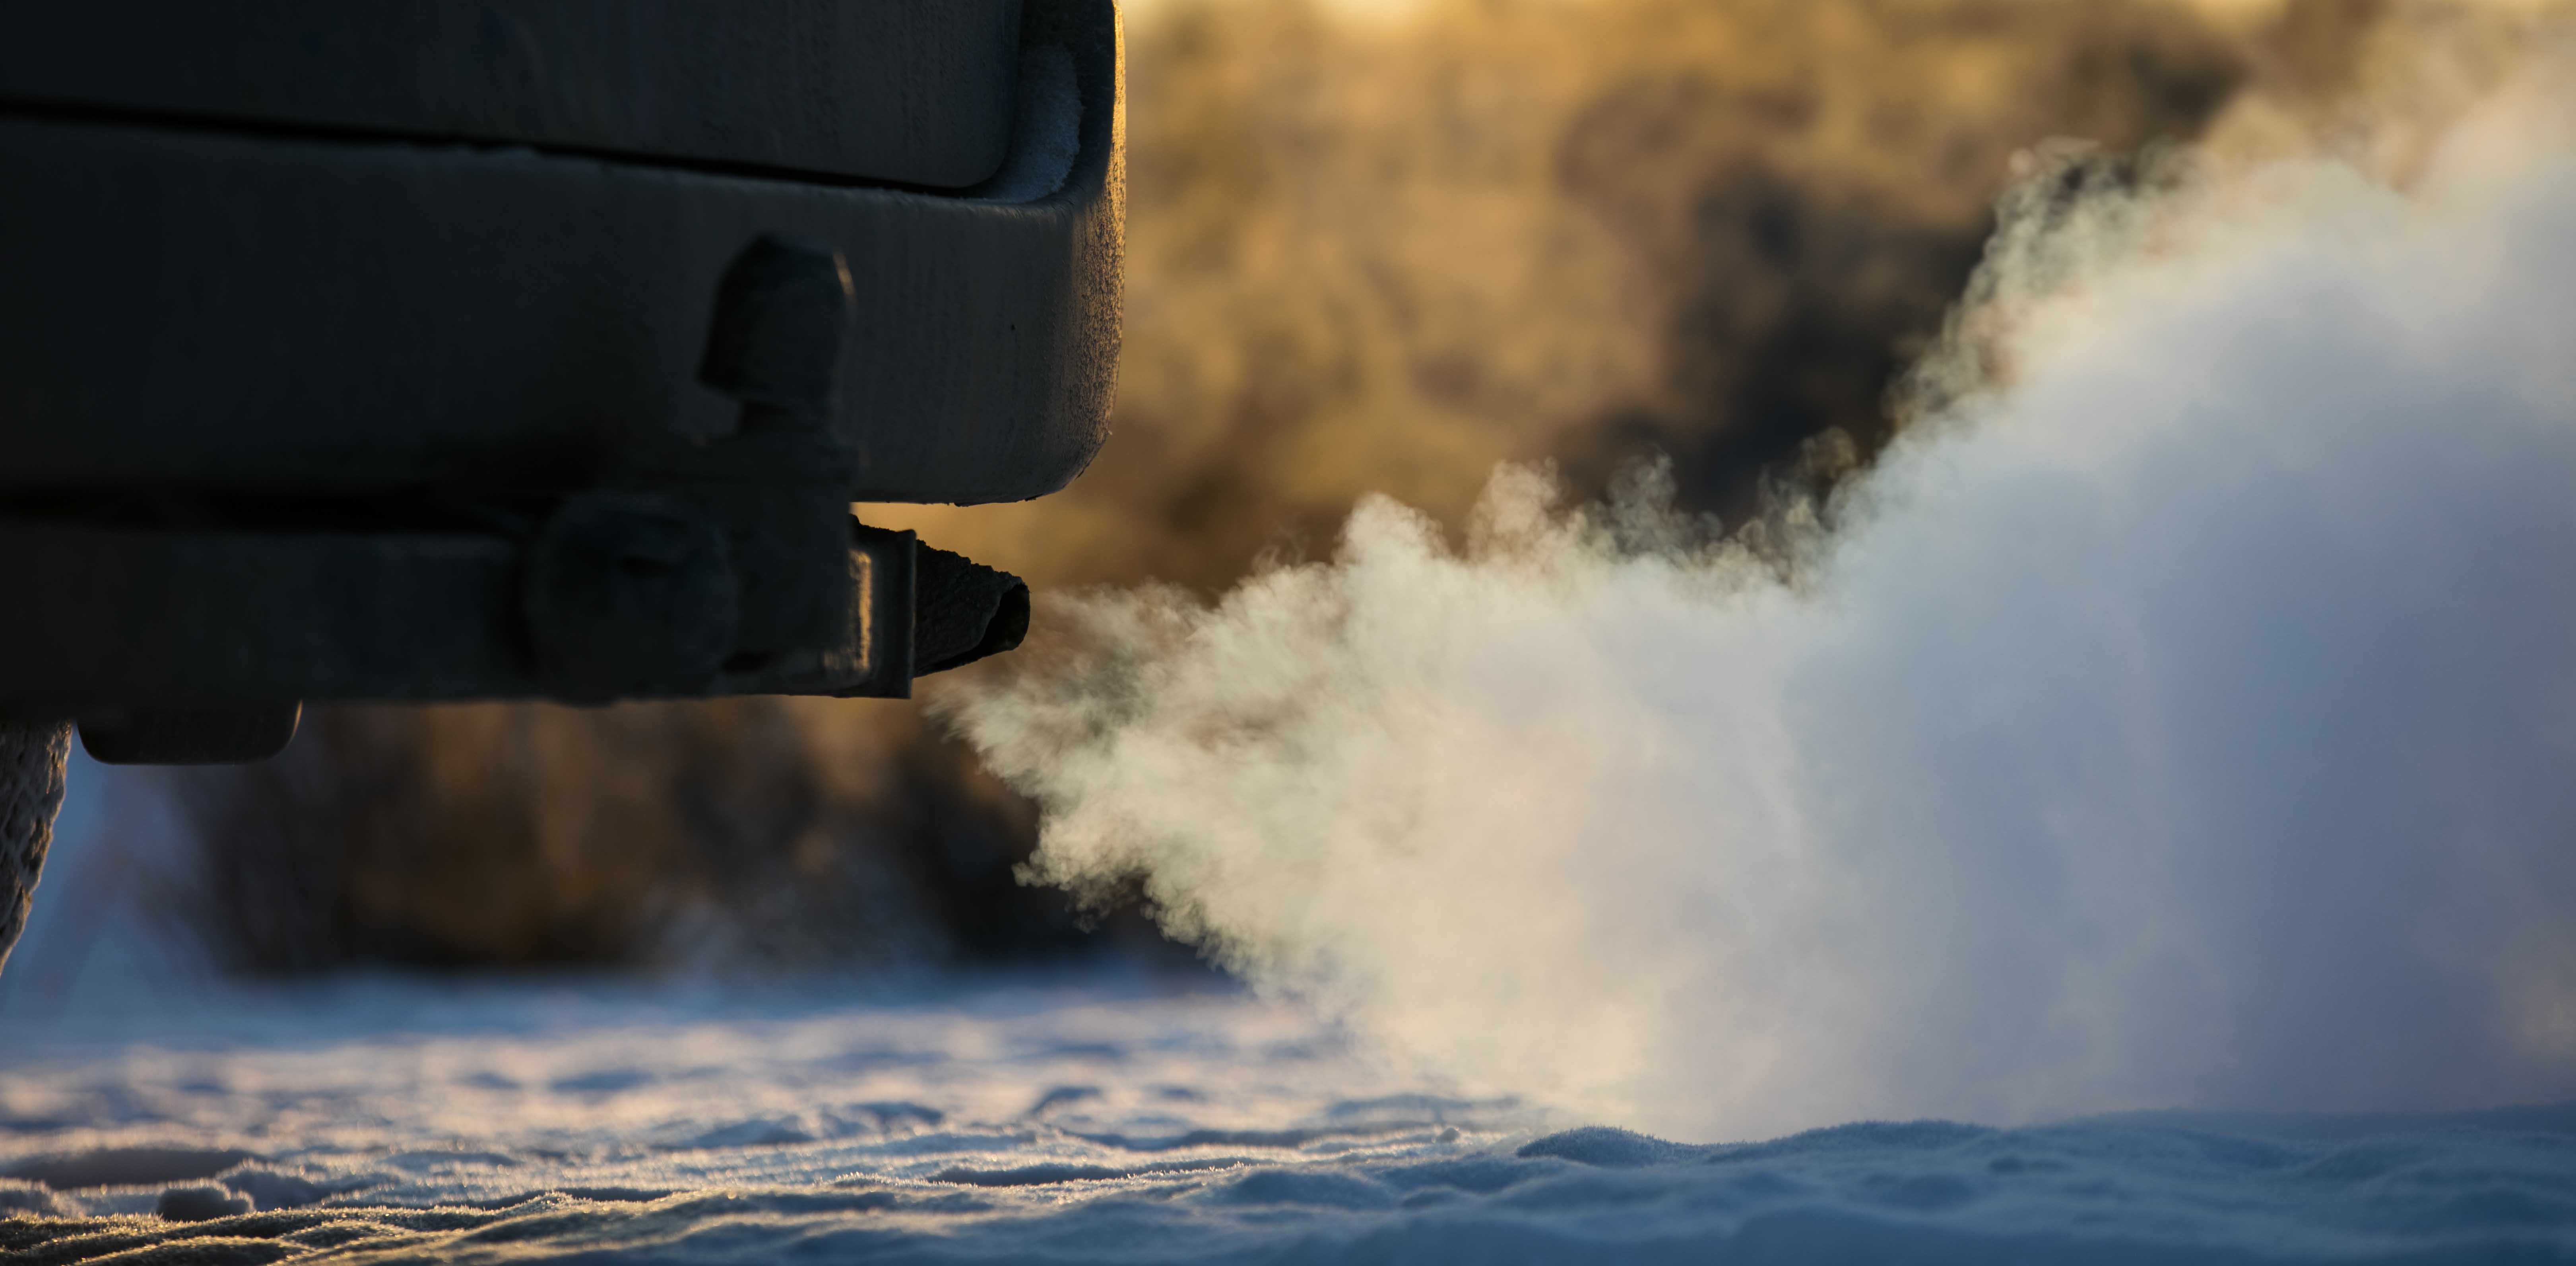 Car idling is it illegal to leave my engine running in cold weather